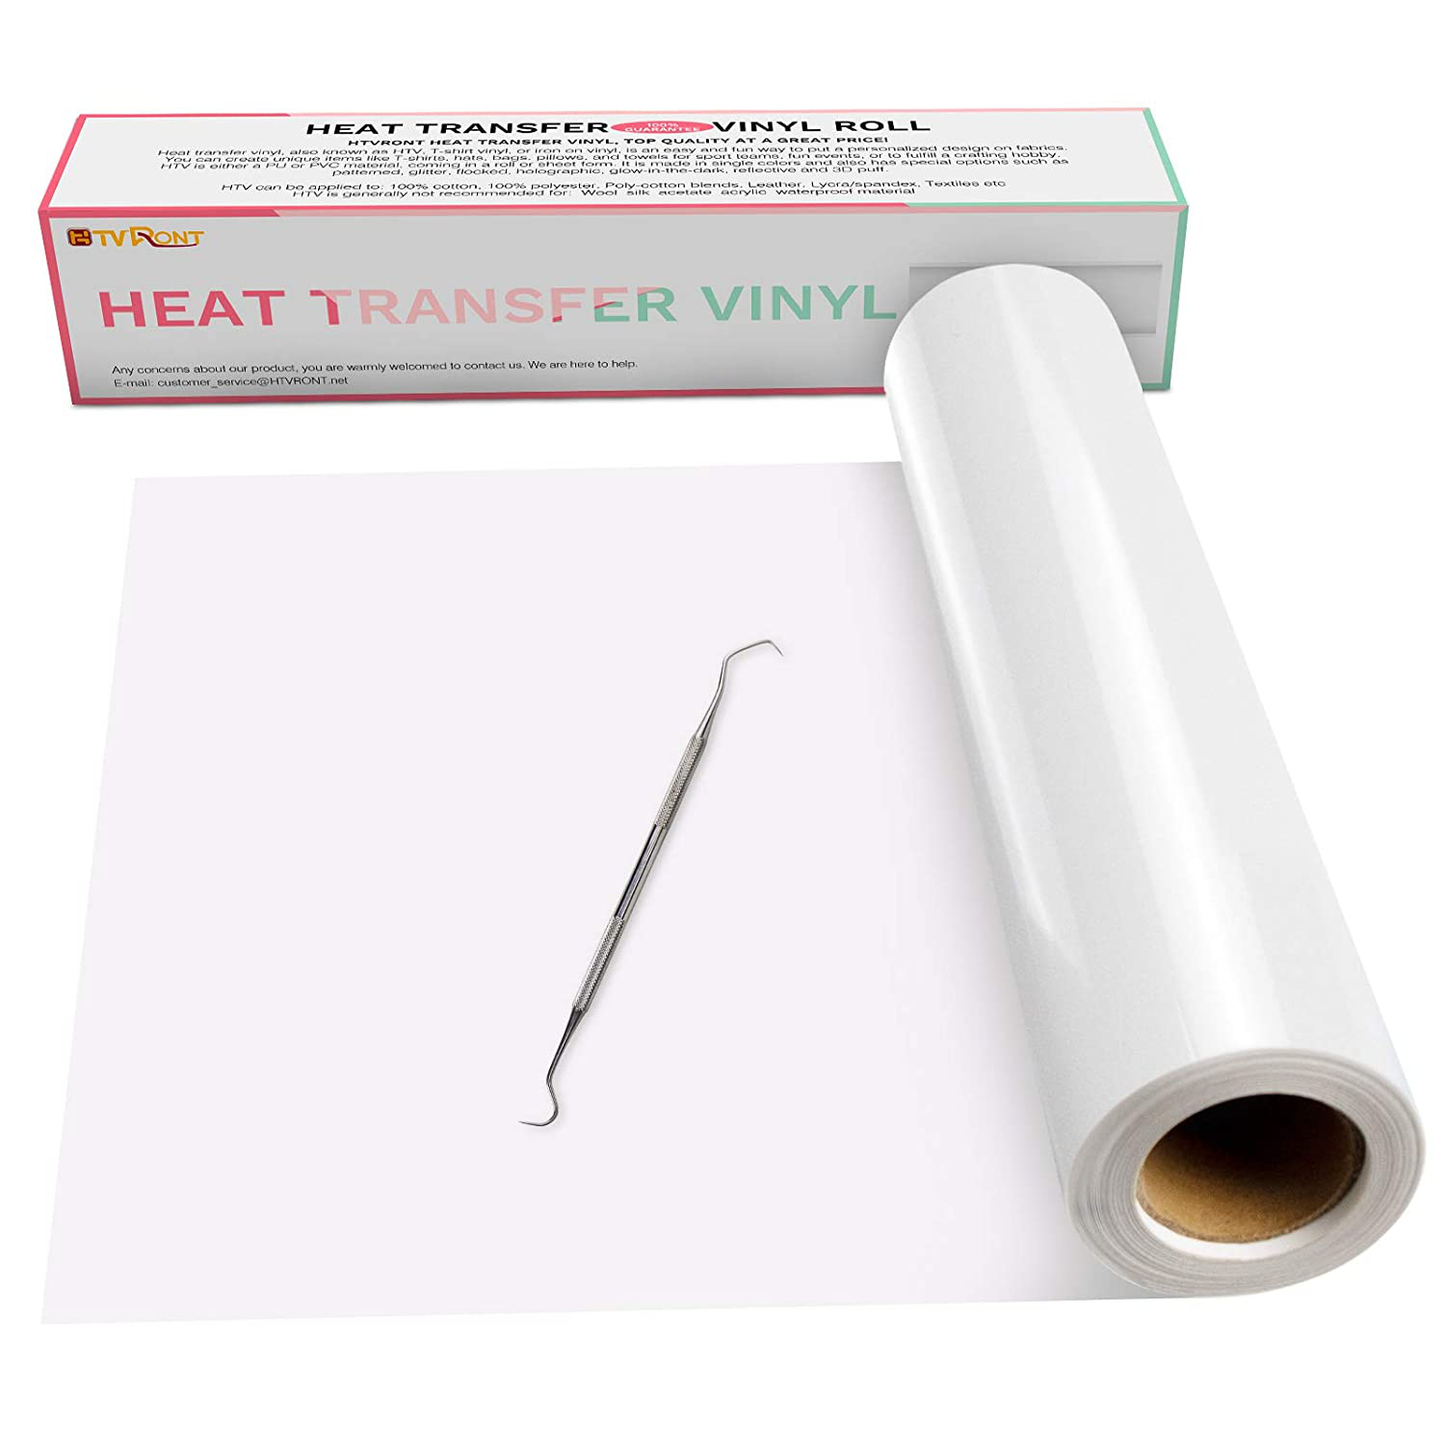 Heat Transfer Vinyl Red HTV Rolls - 12" x 15ft Red Iron on Vinyl for Cricut & Silhouette Cameo Easy to Cut & Weed for Heat Vinyl Design